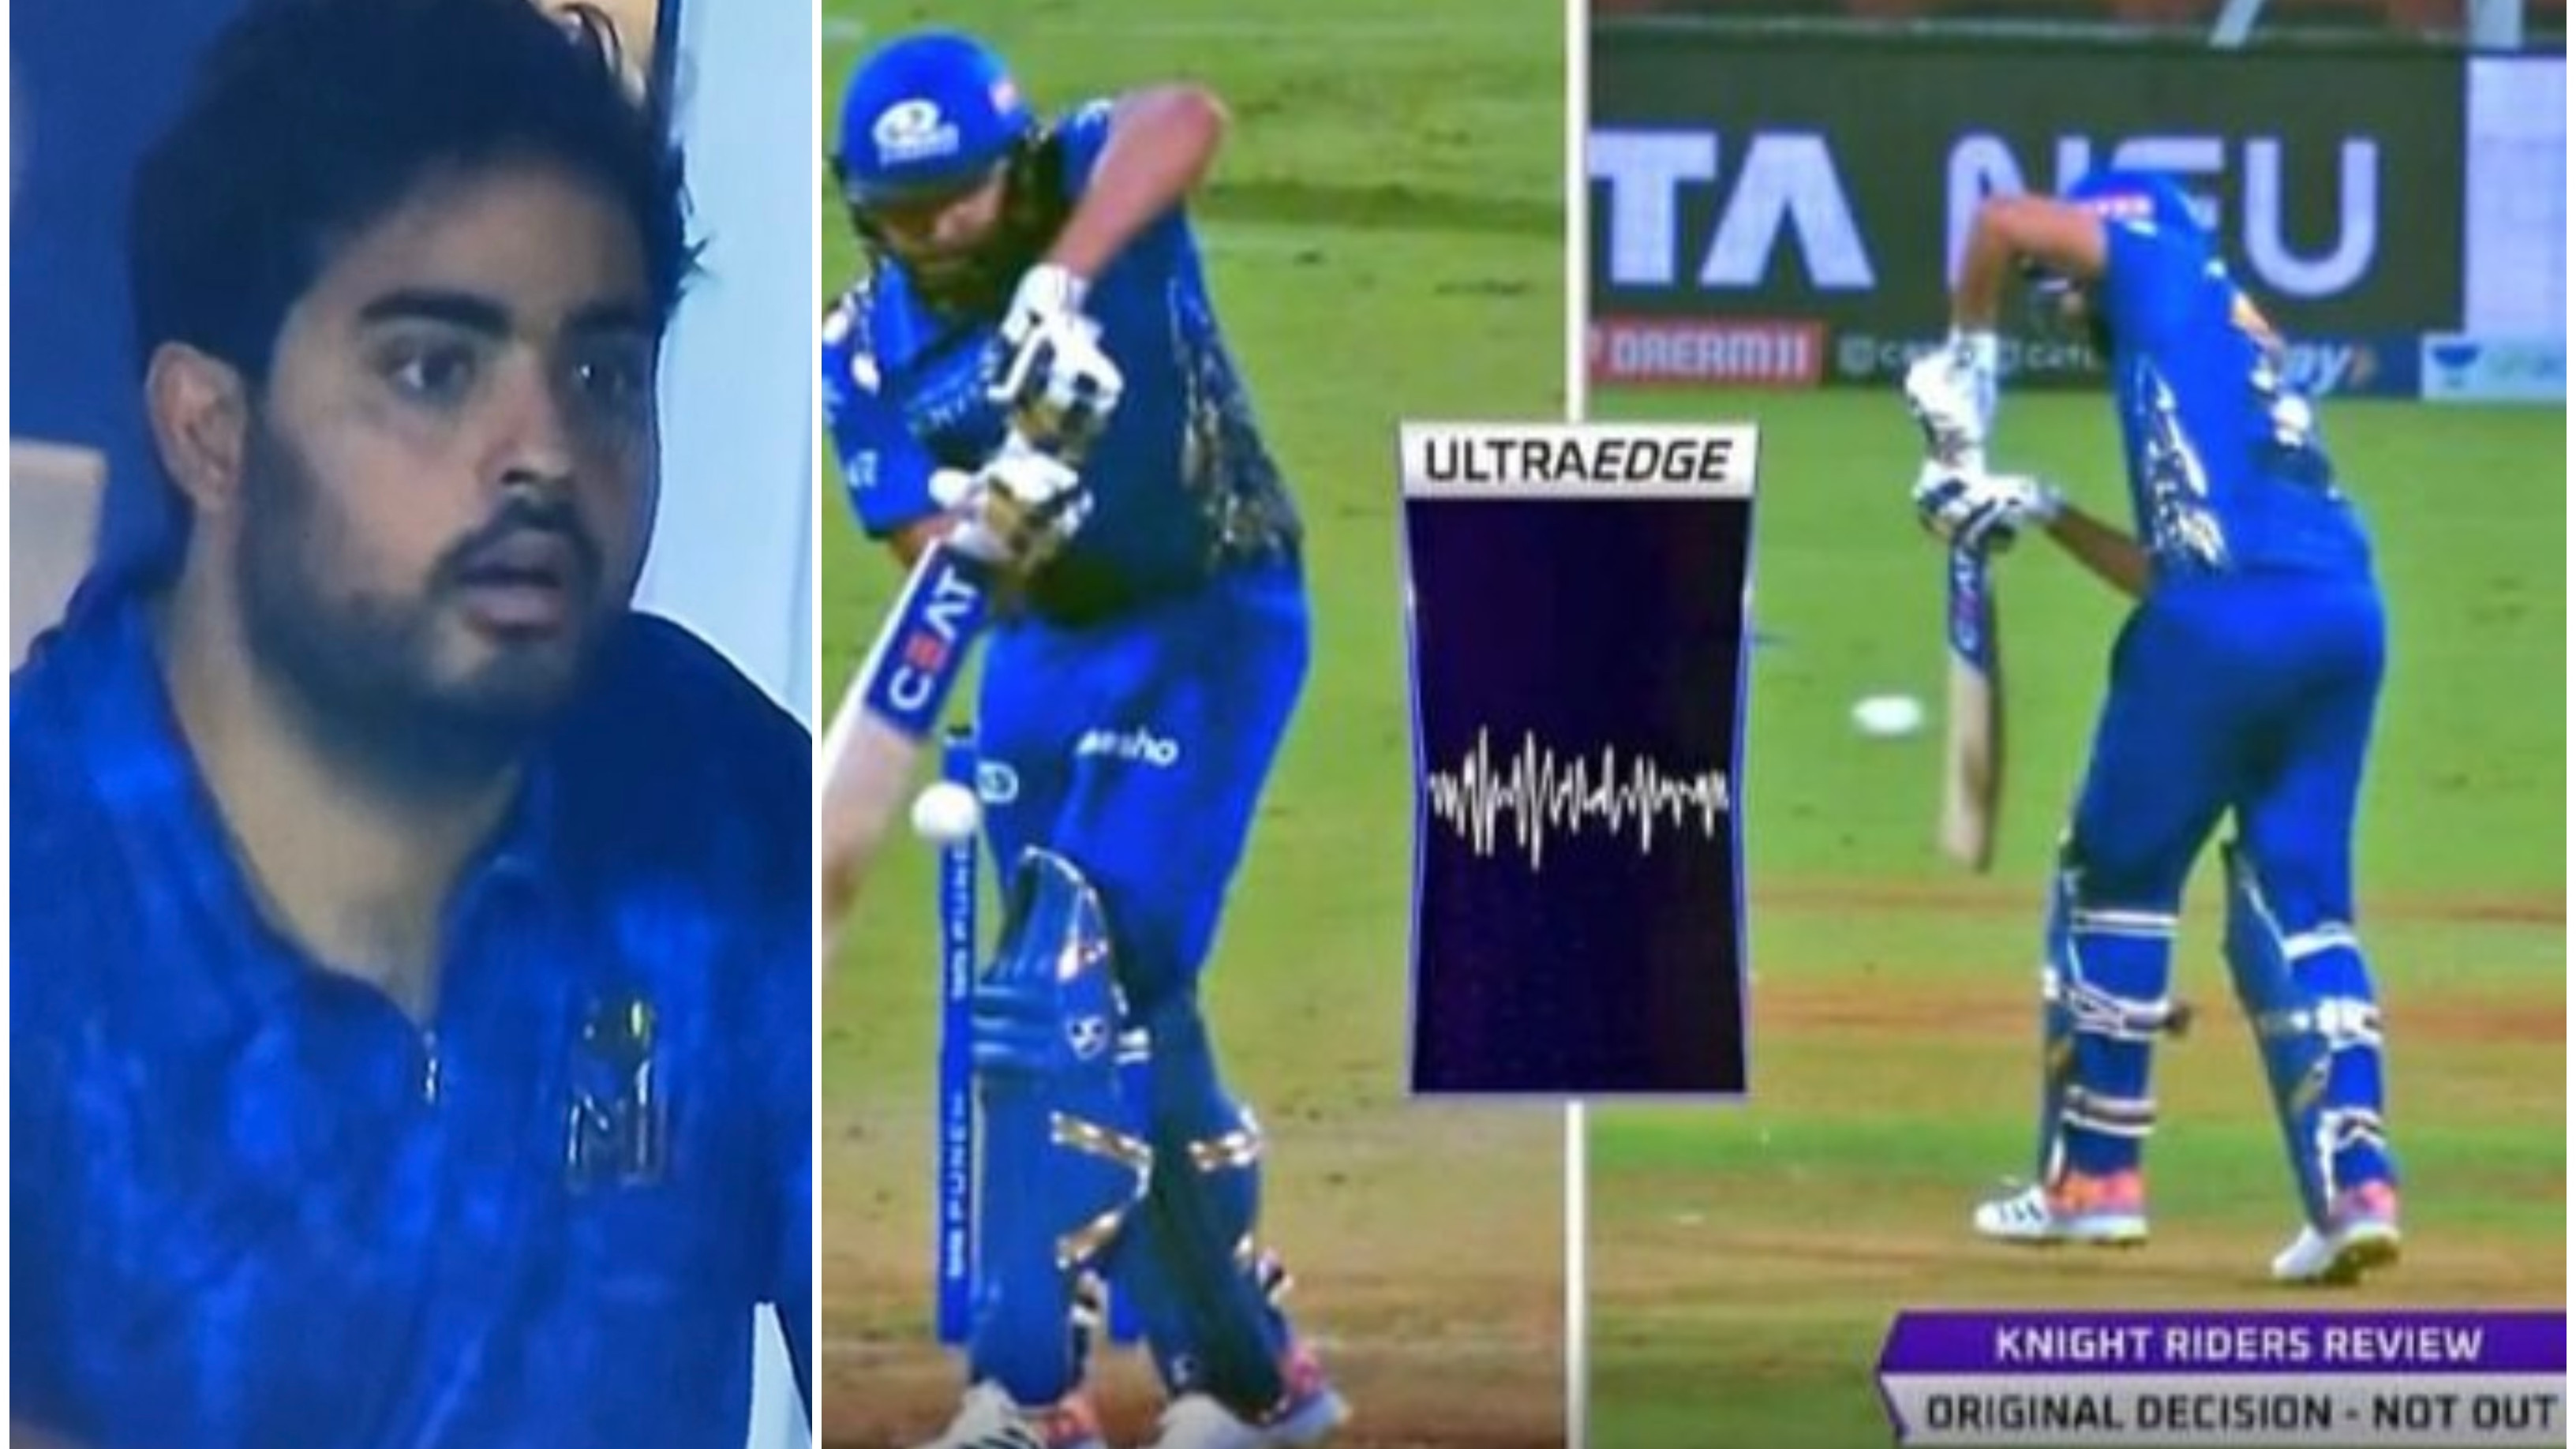 IPL 2022: Twitterati react after Rohit Sharma given out in a controversial fashion by third umpire